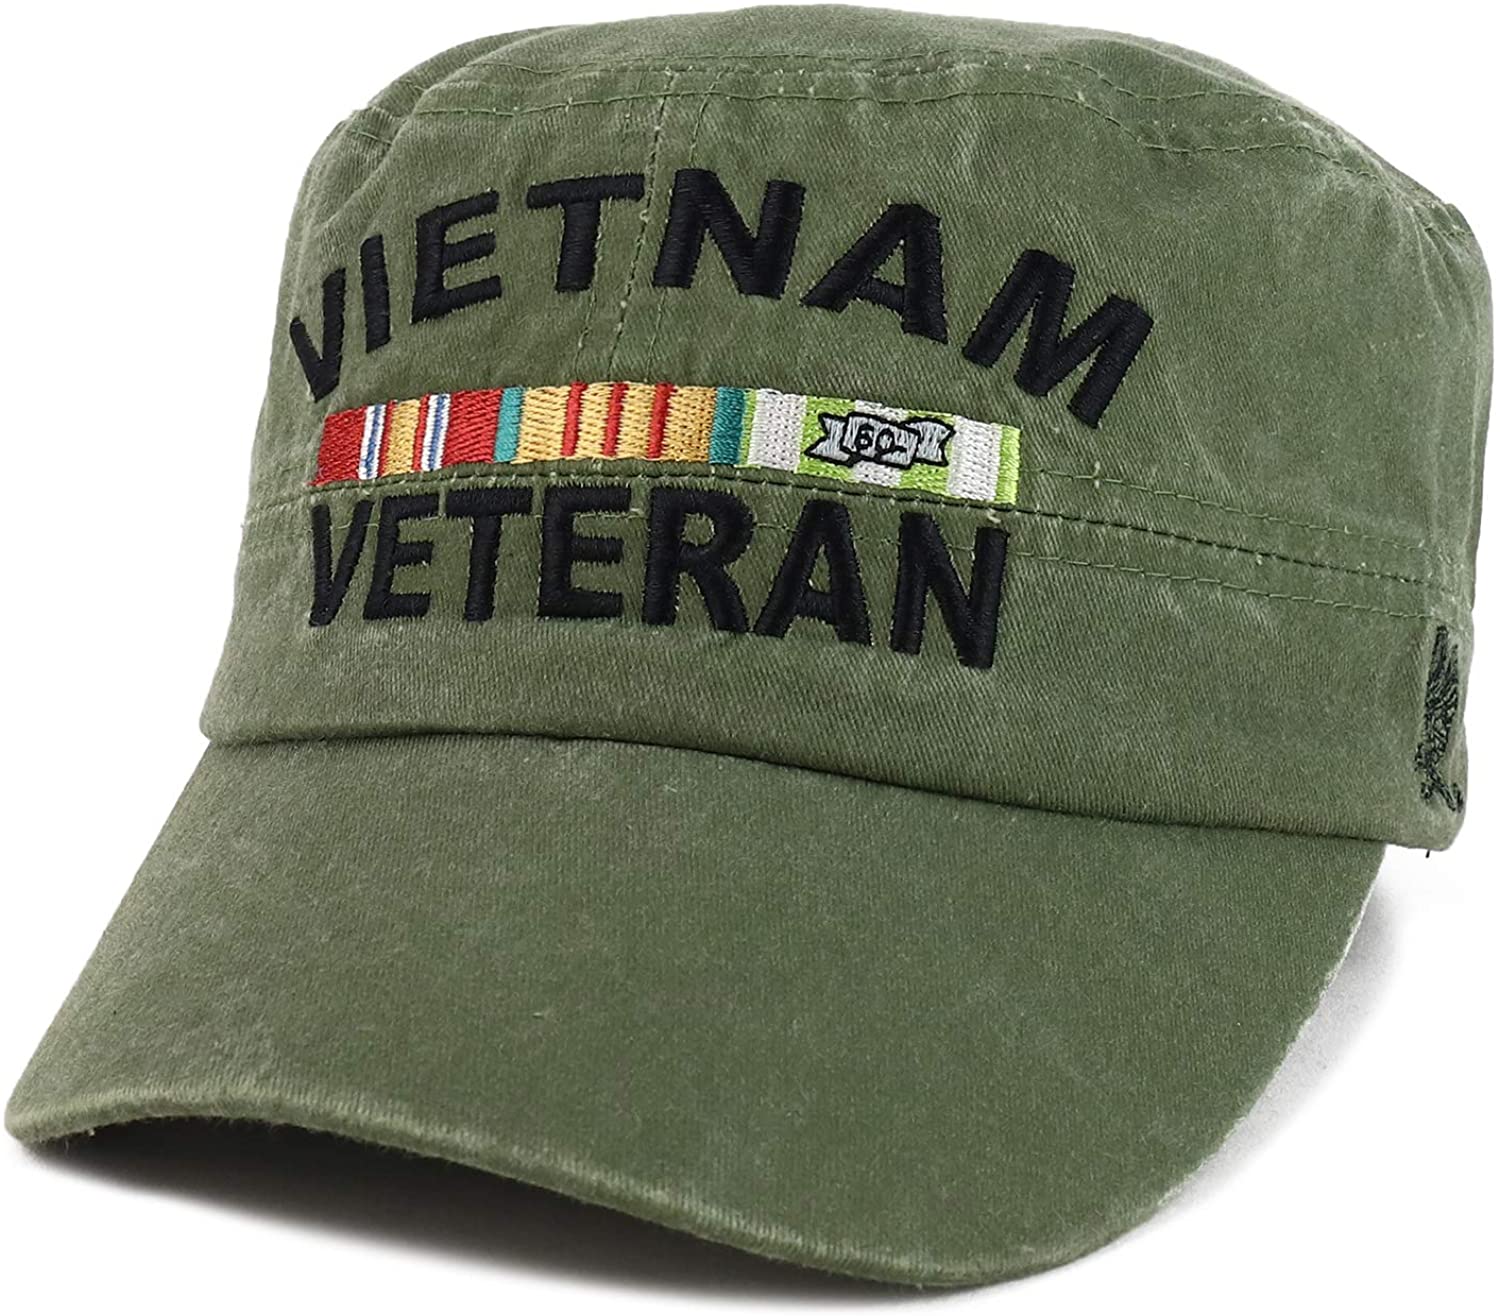 Armycrew Vietnam Veteran Ribbon Embroidered Washed Pigment Dyed Flat Top Cap - Olive